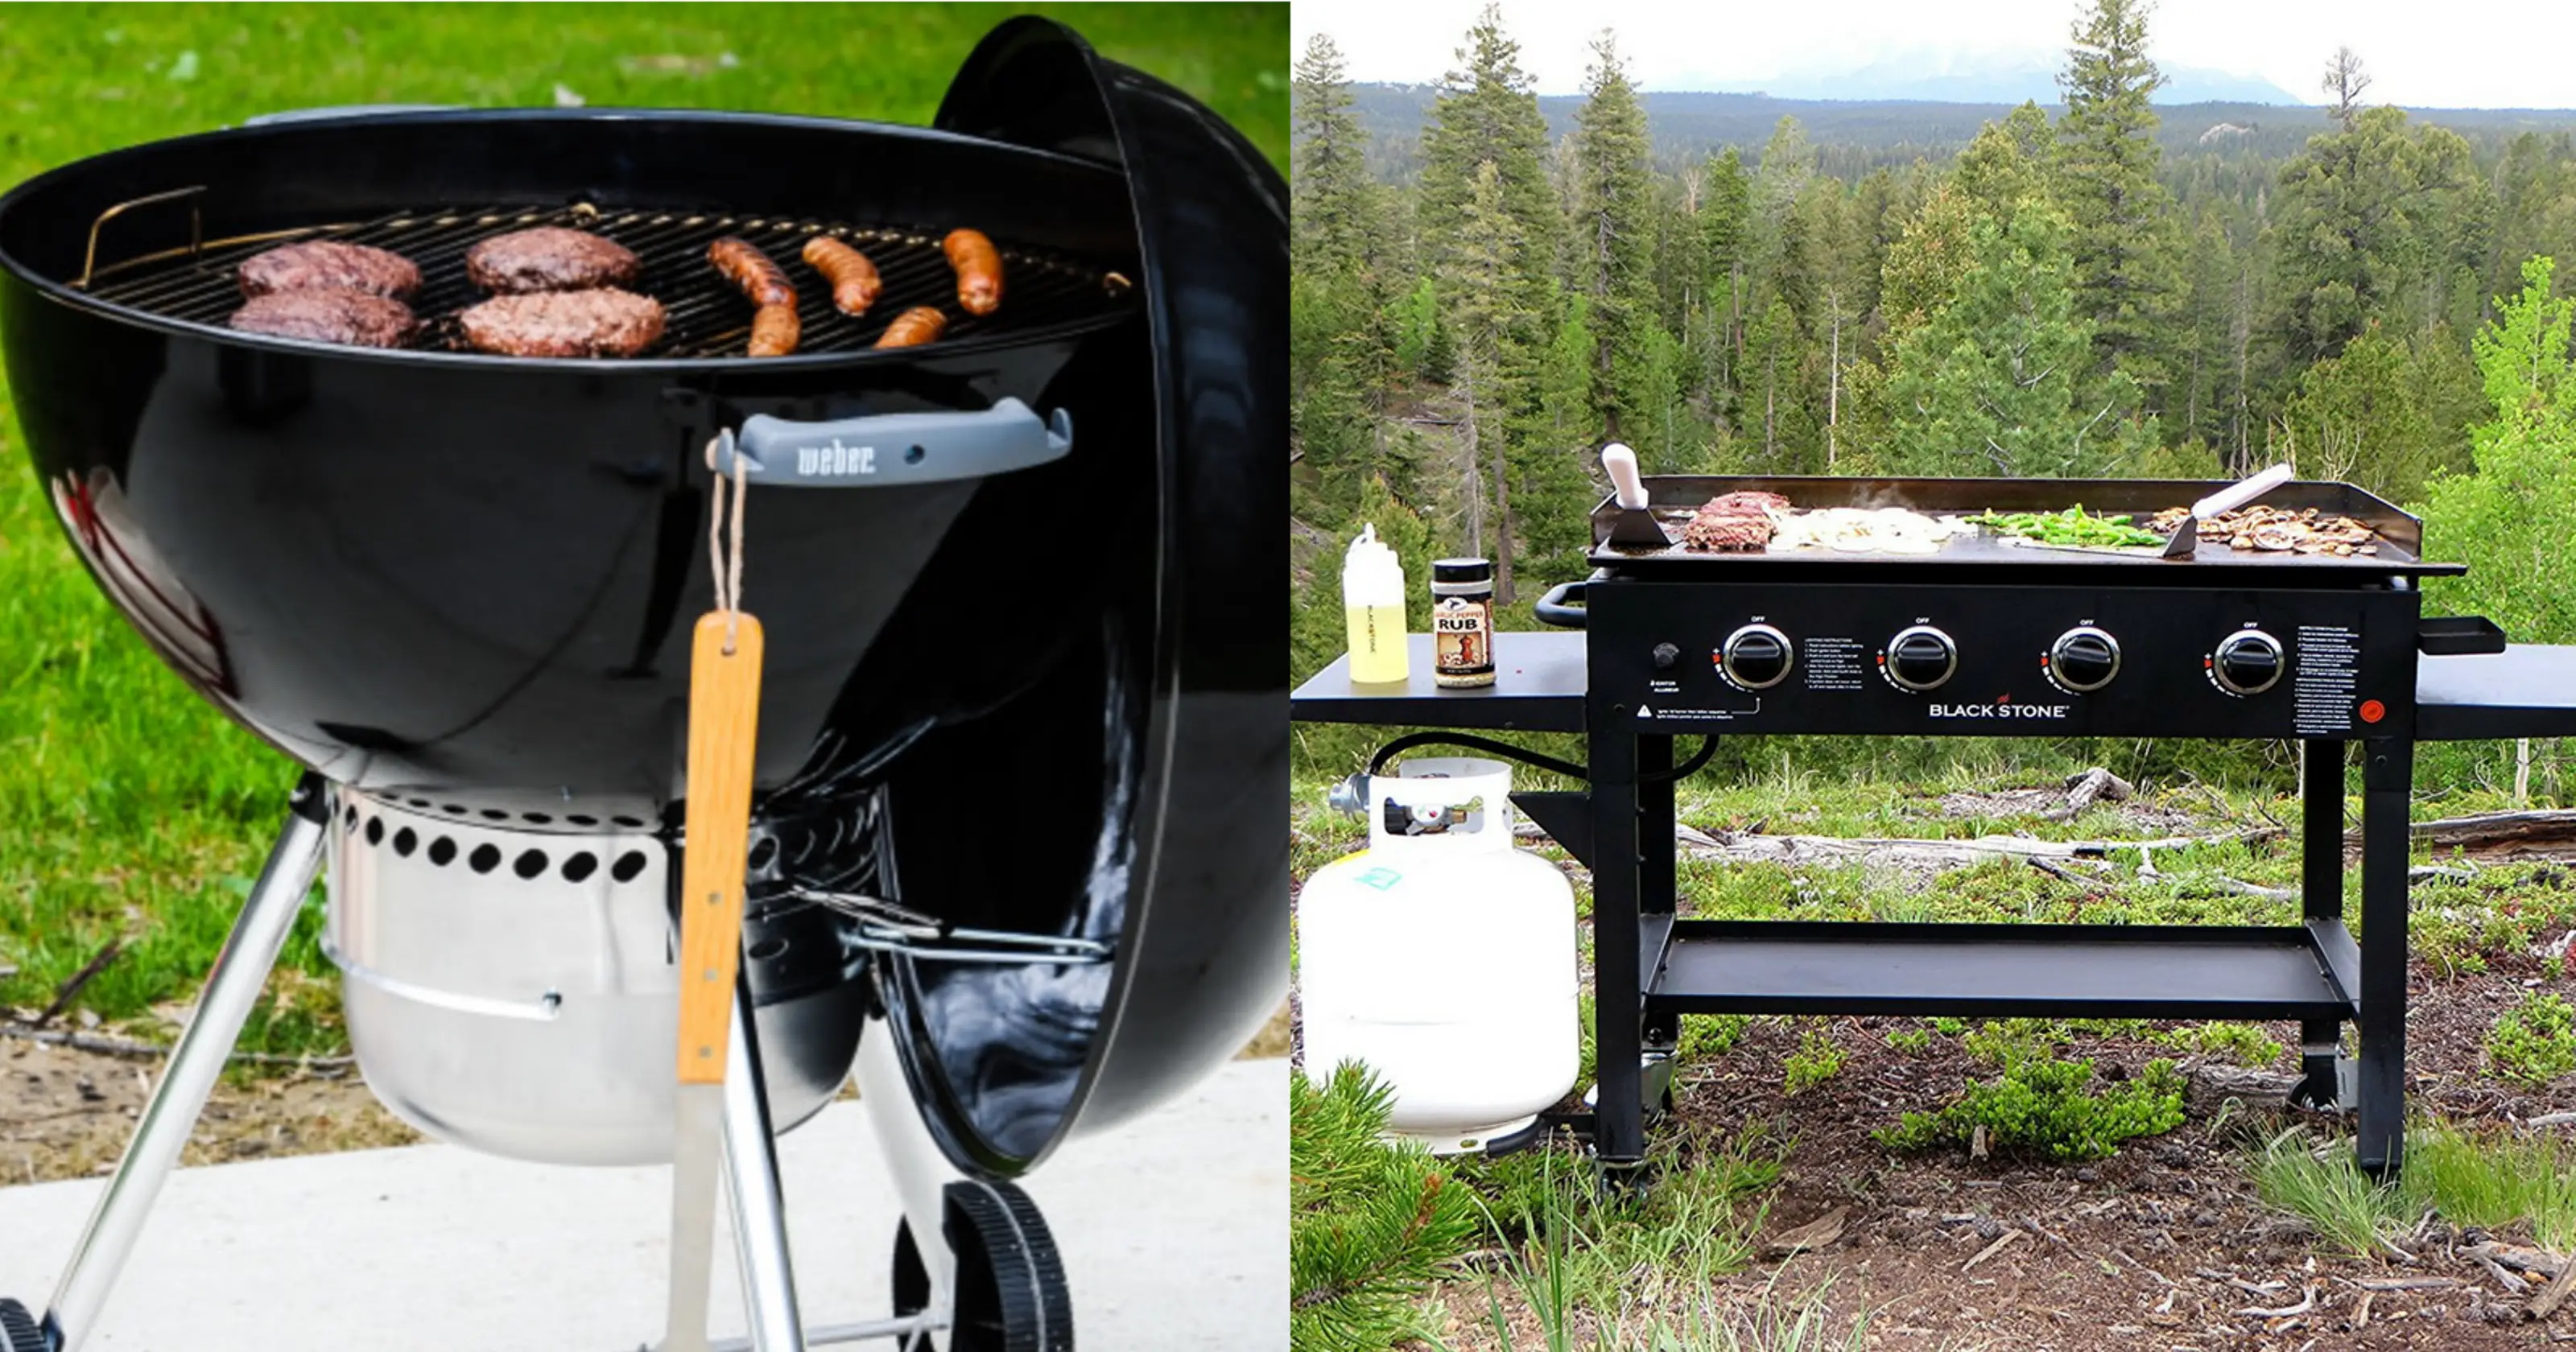 The 8 best grills you can buy in 2018